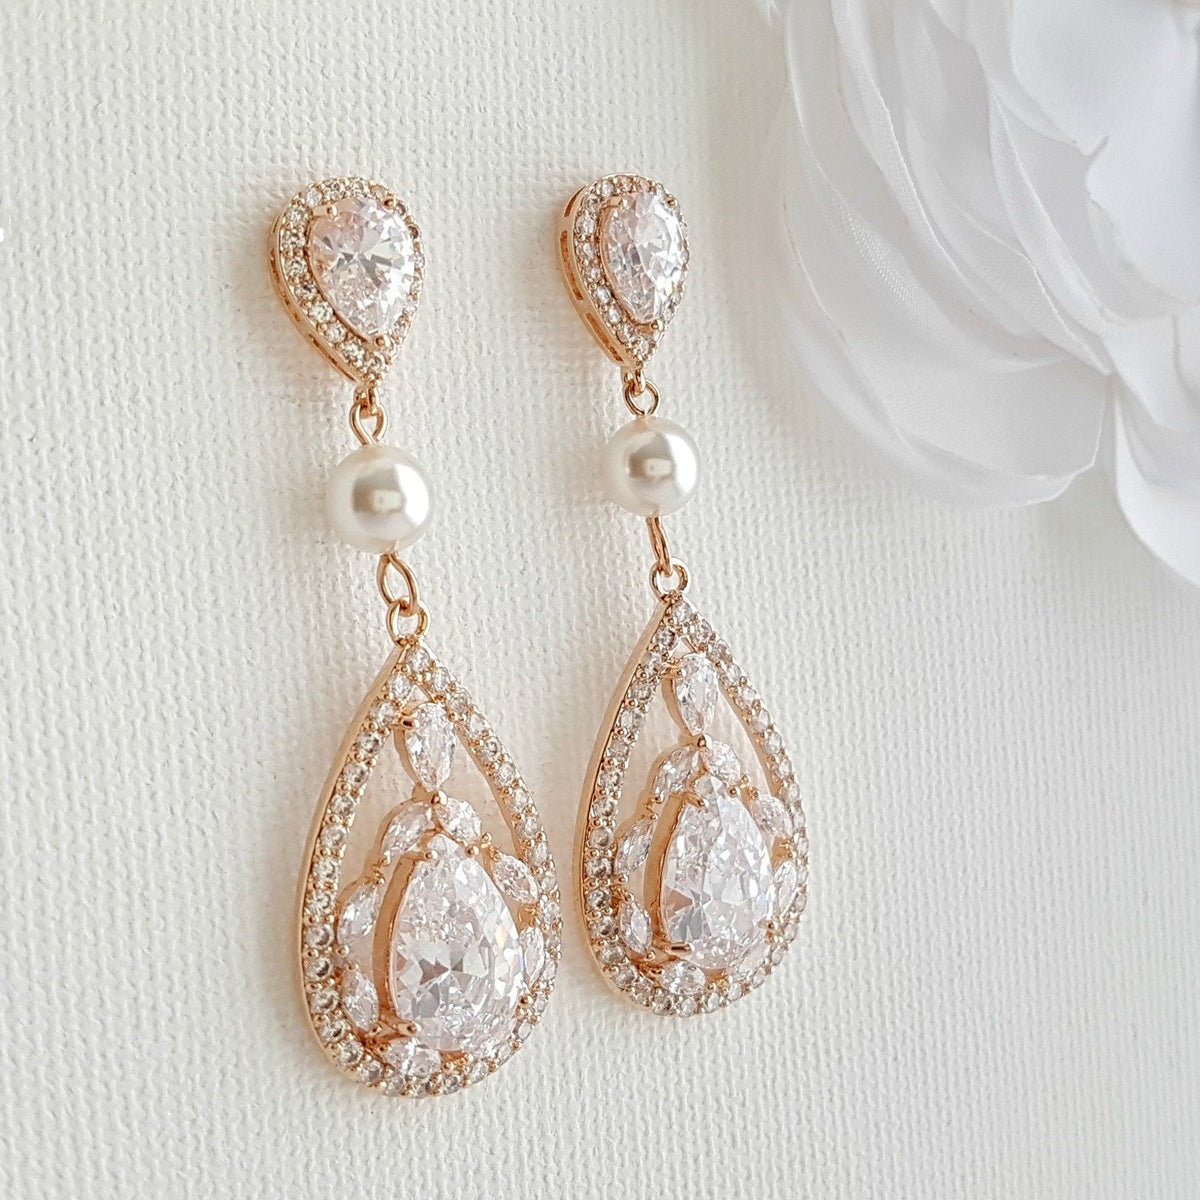 Clip On Earrings for Brides, Bridesmaids & Women with Non Pierced ears ...